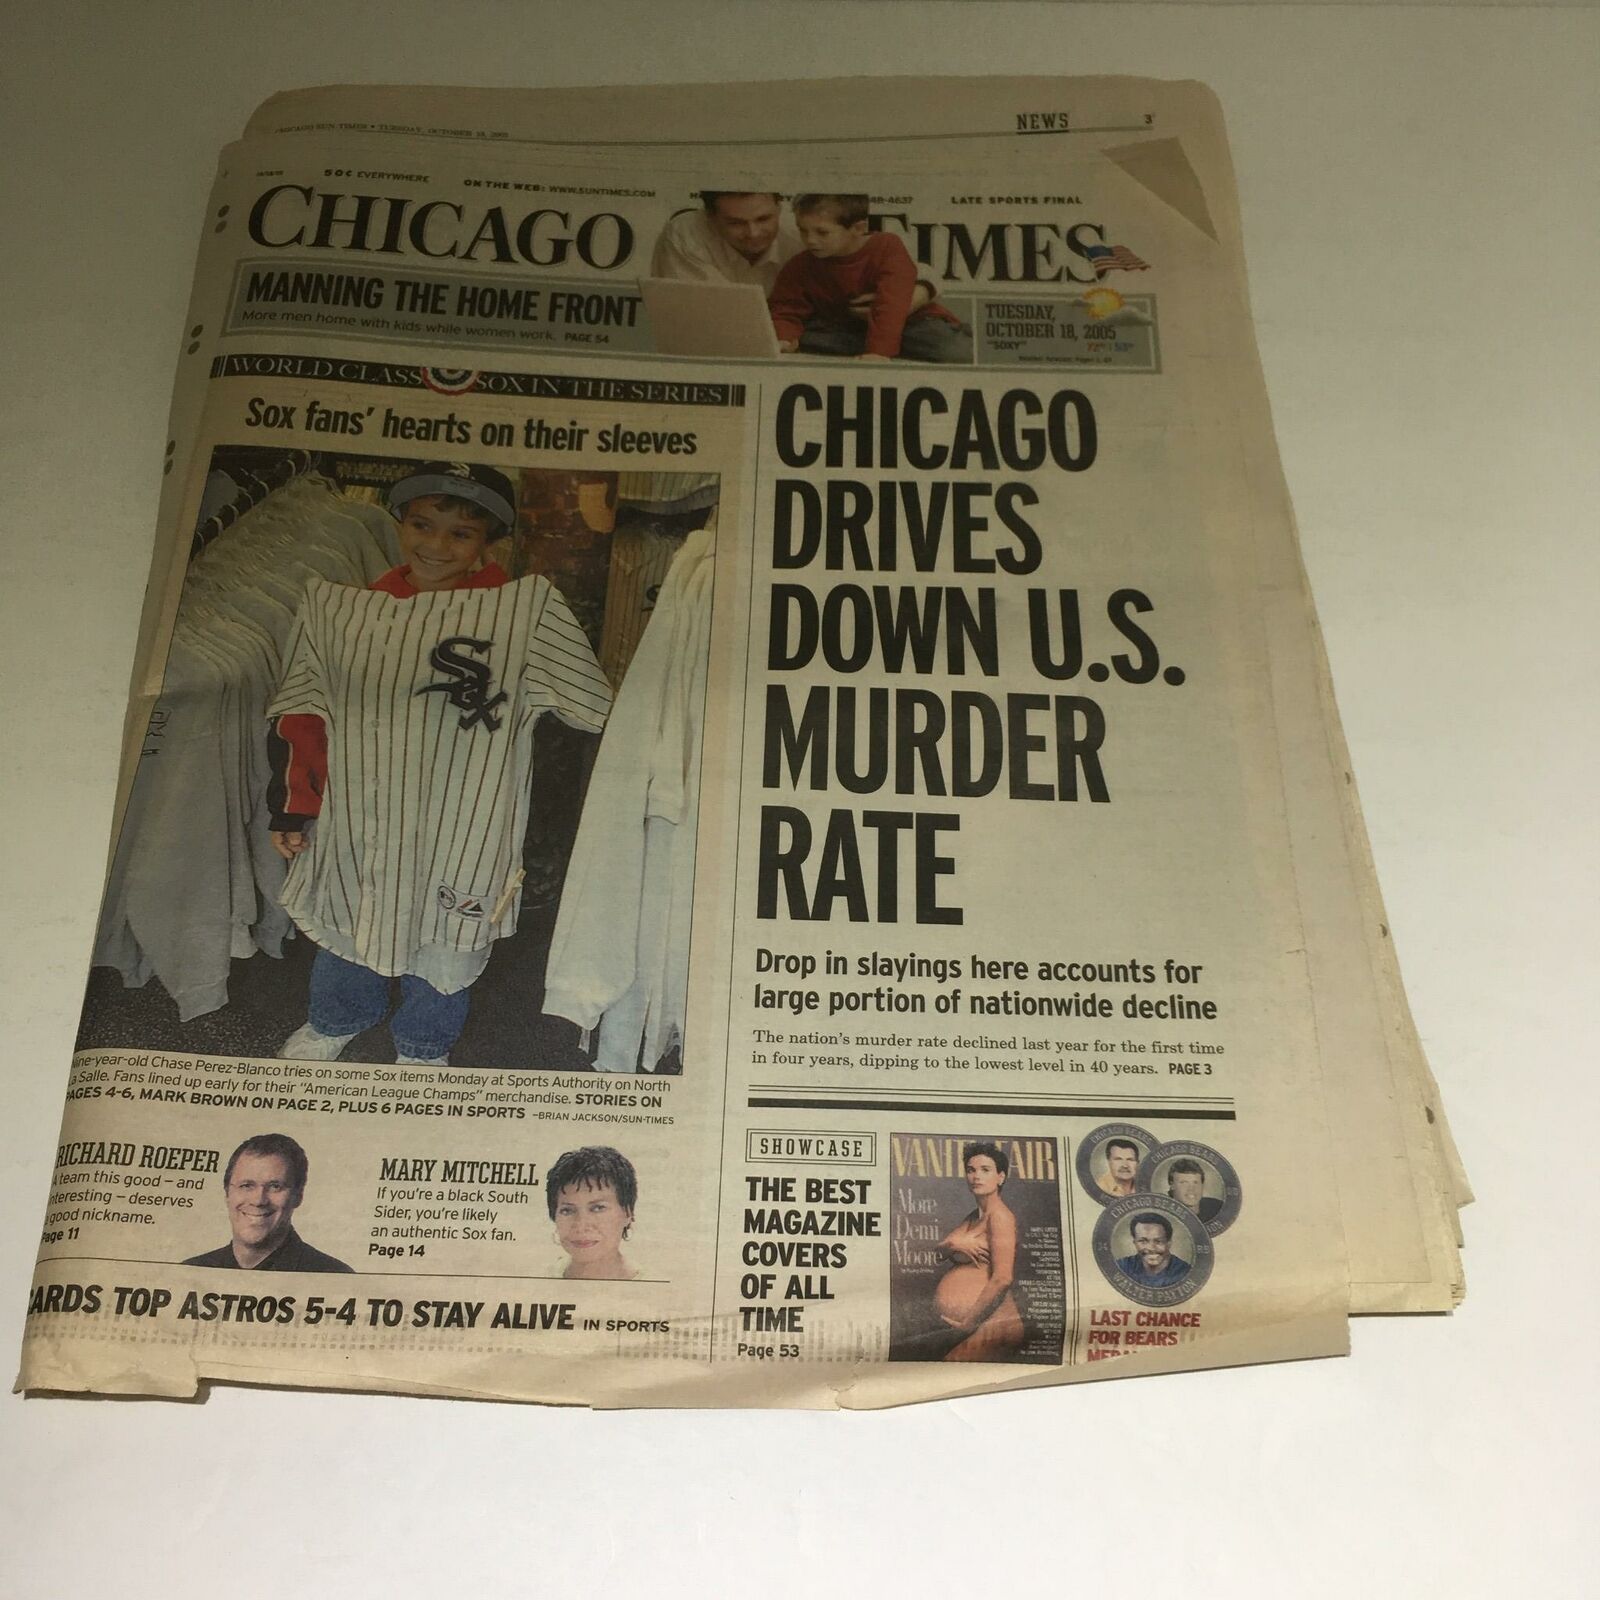 Chicago Sun-Times: Oct 18 2005 Chicago Drives Down U.S Murder Rate